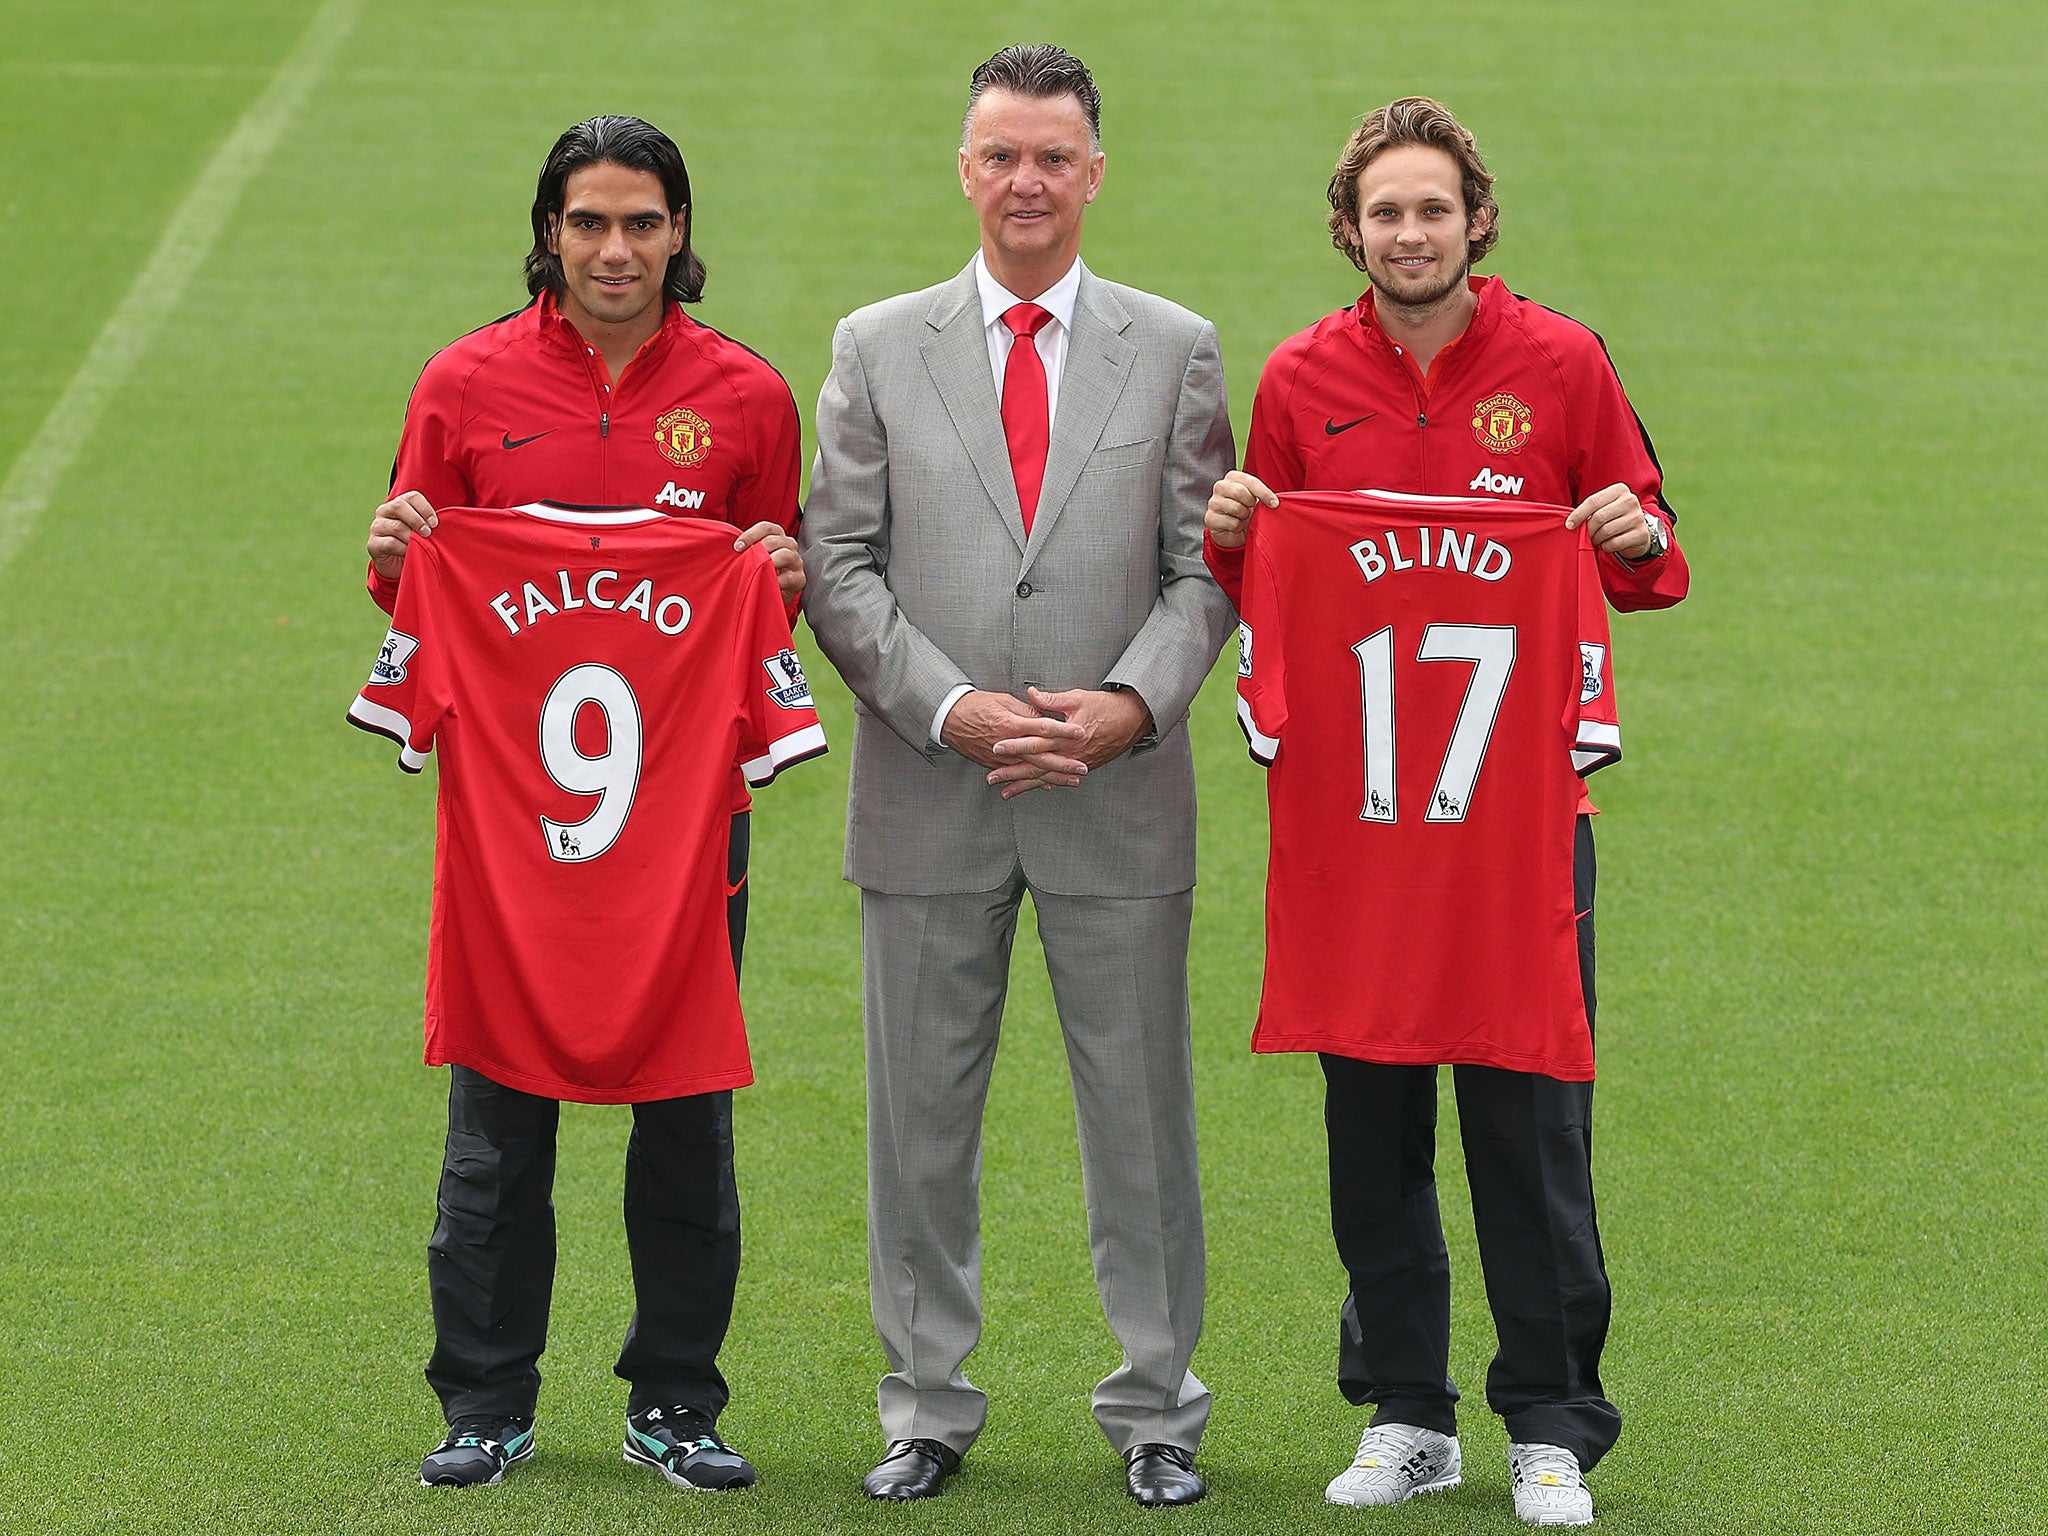 Radamel Falcao (left) and Daley Blind (right) unveiled alongside manager Louis van Gaal today